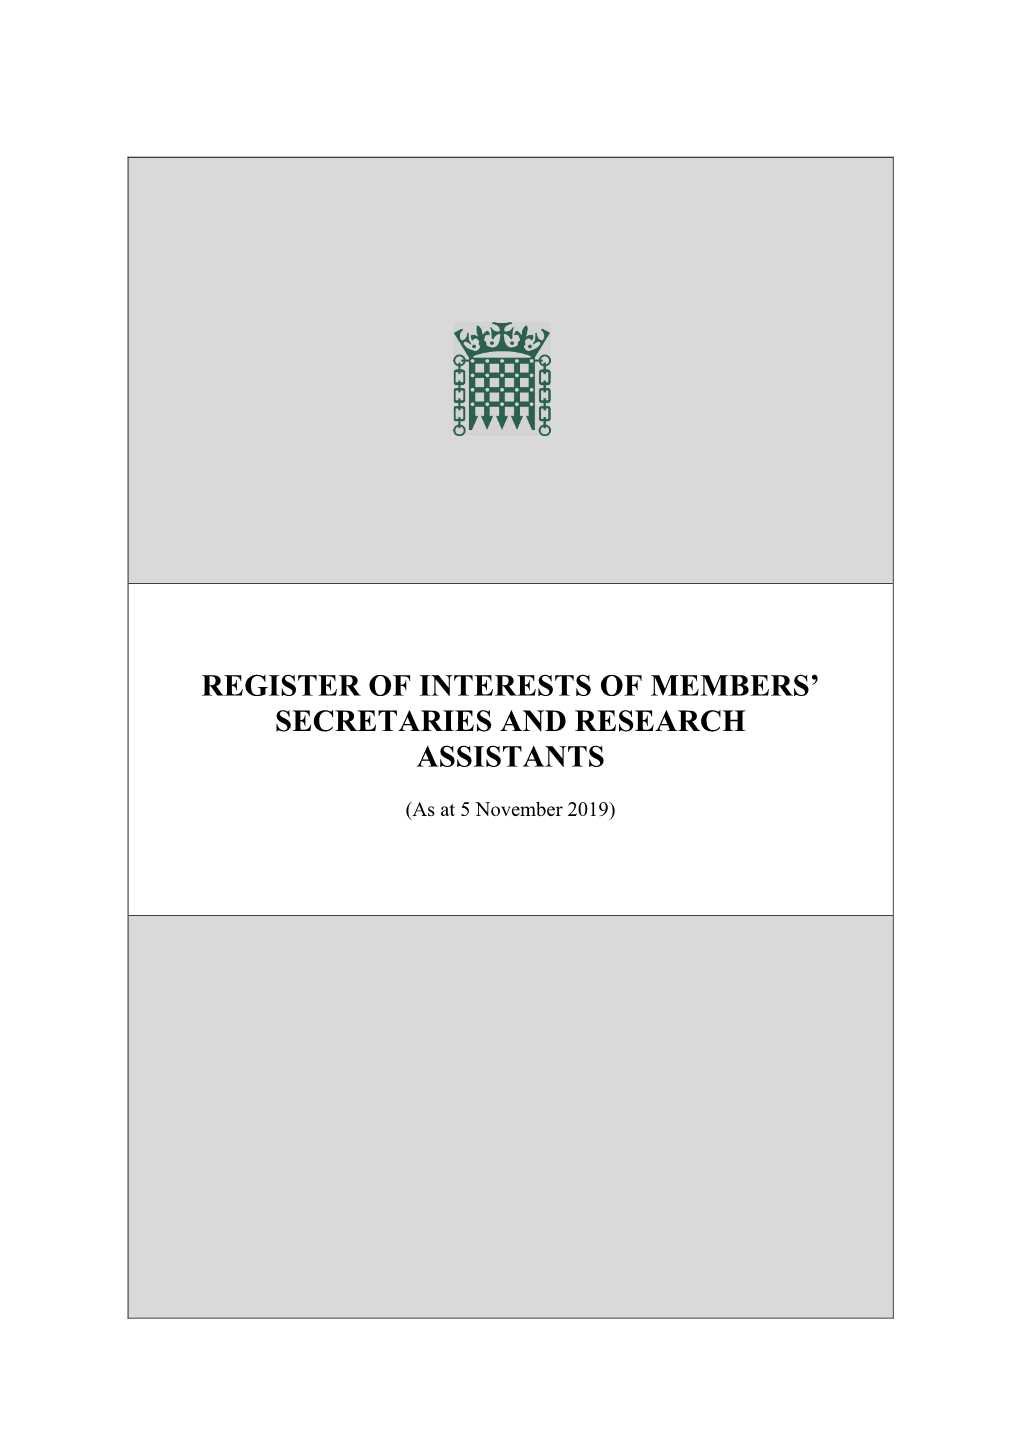 Register of Interests of Members' Secretaries and Research Assistants